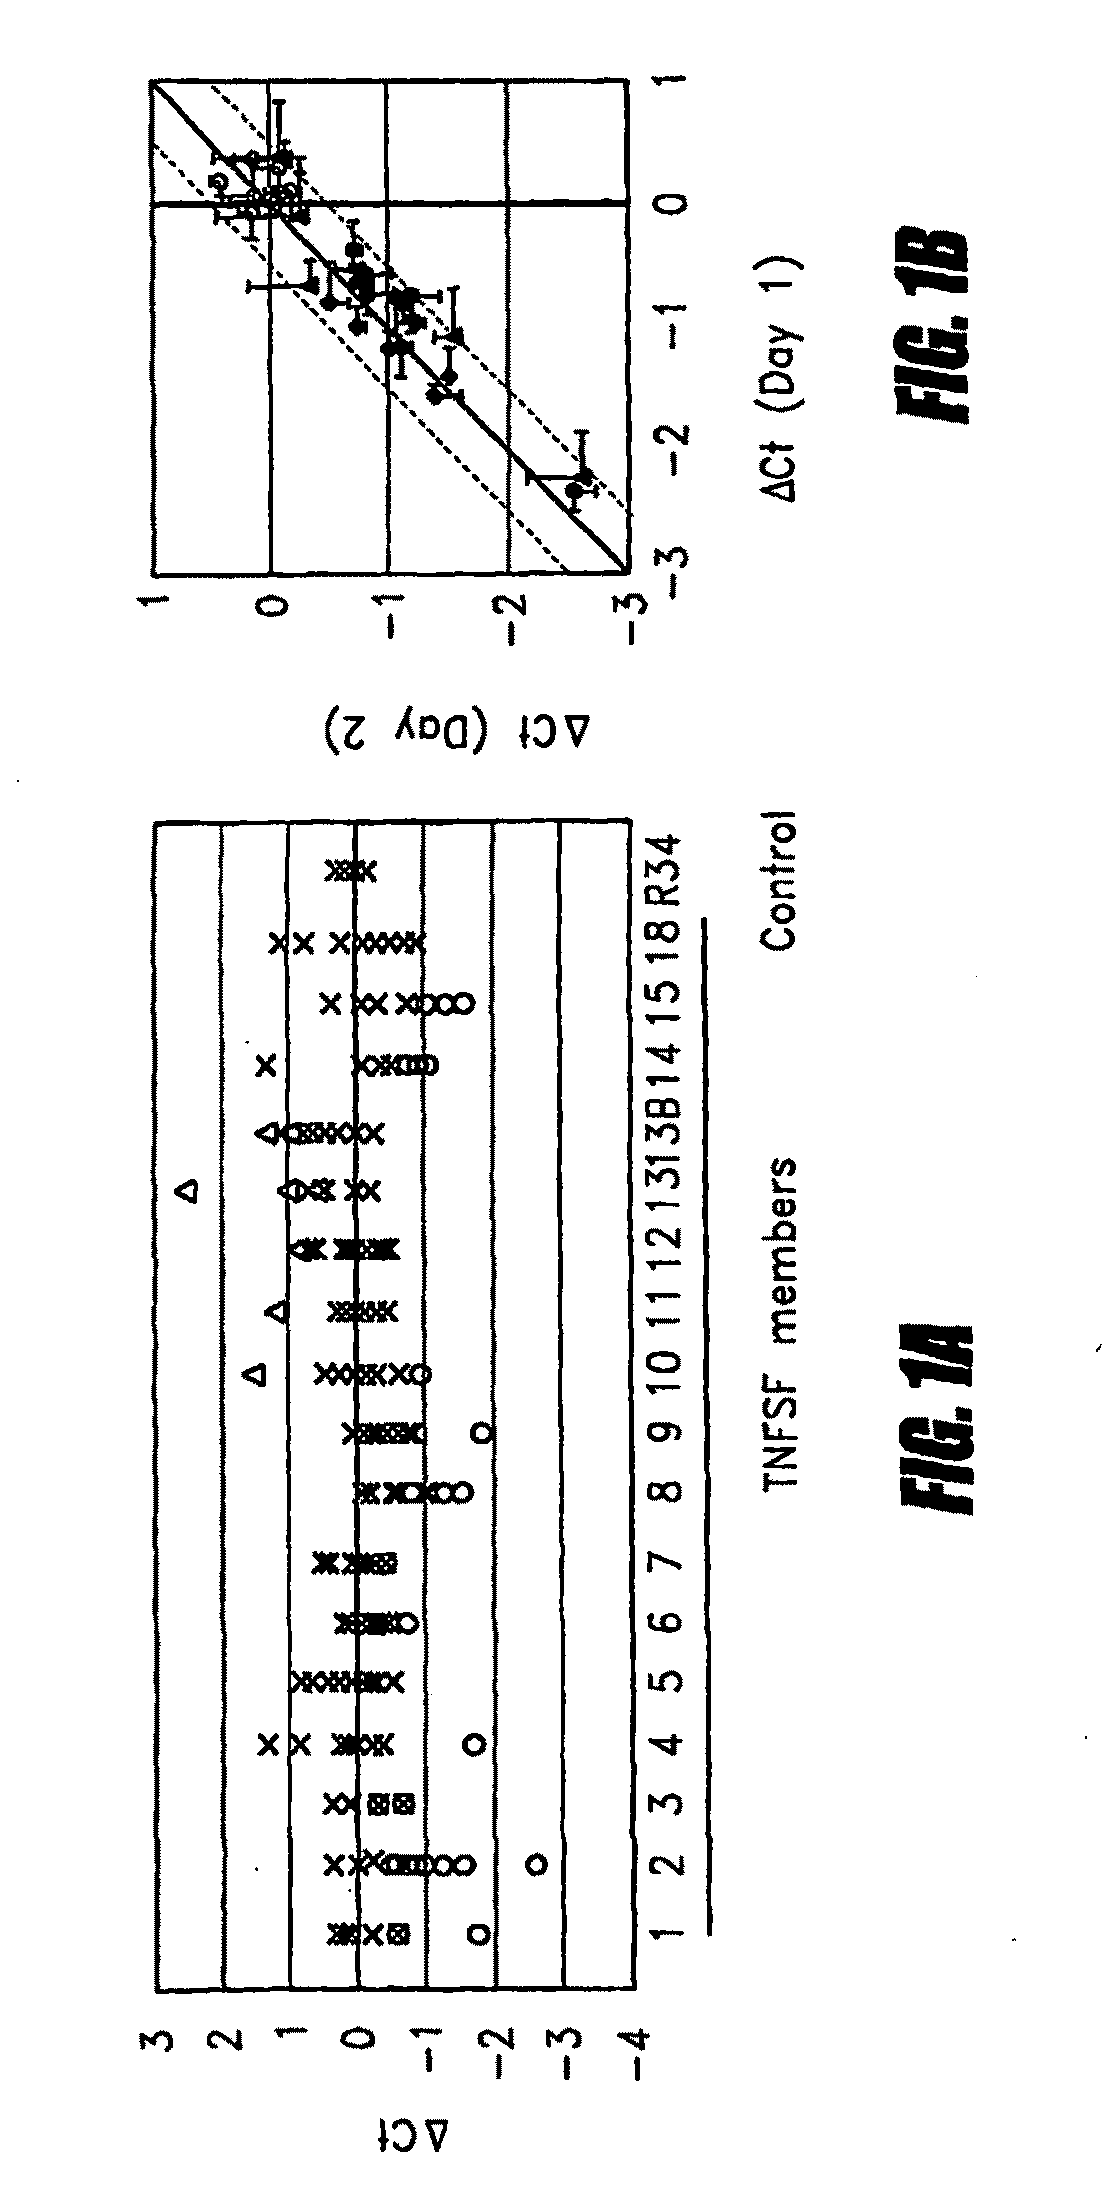 METHOD FOR PREDICTING IMMUNE RESPONSE TO NEOPLASTIC DISEASE BASED ON mRNA EXPRESSION PROFILE IN NEOPLASTIC CELLS AND STIMULATED LEUKOCYTES